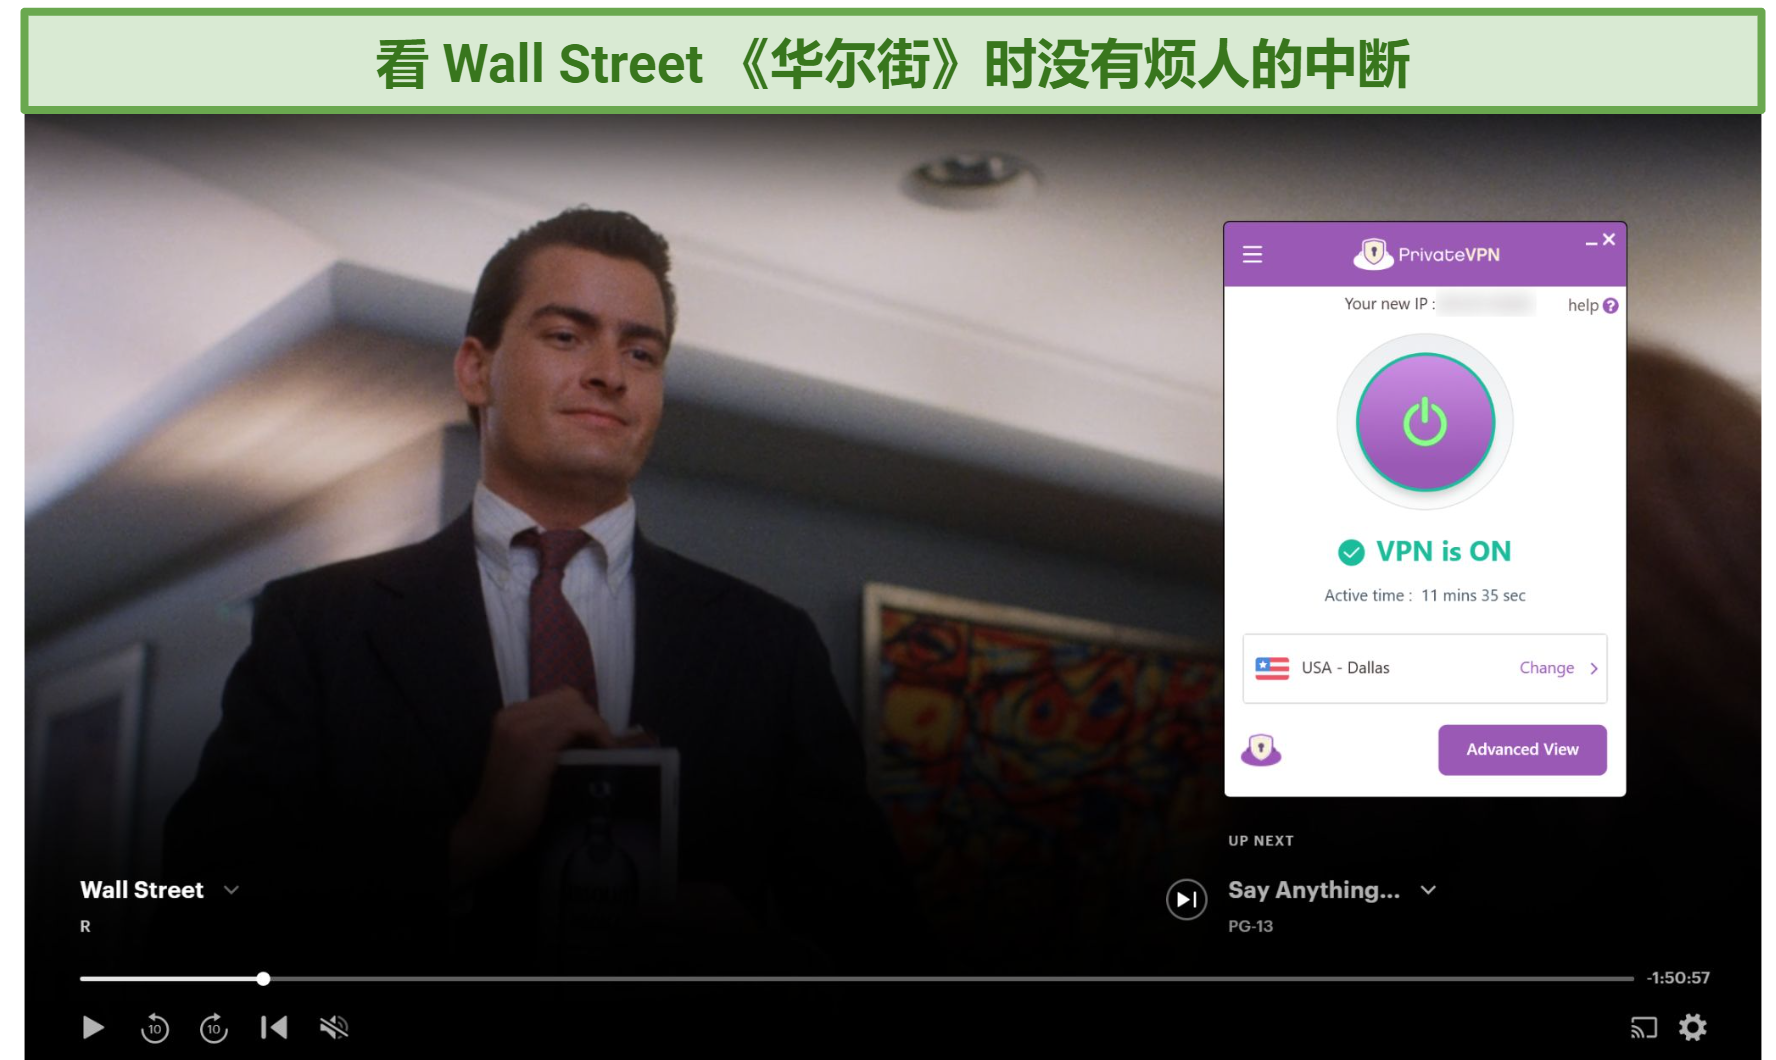 Screenshot of Hulu player streaming Wall Street while connected to PrivateVPN